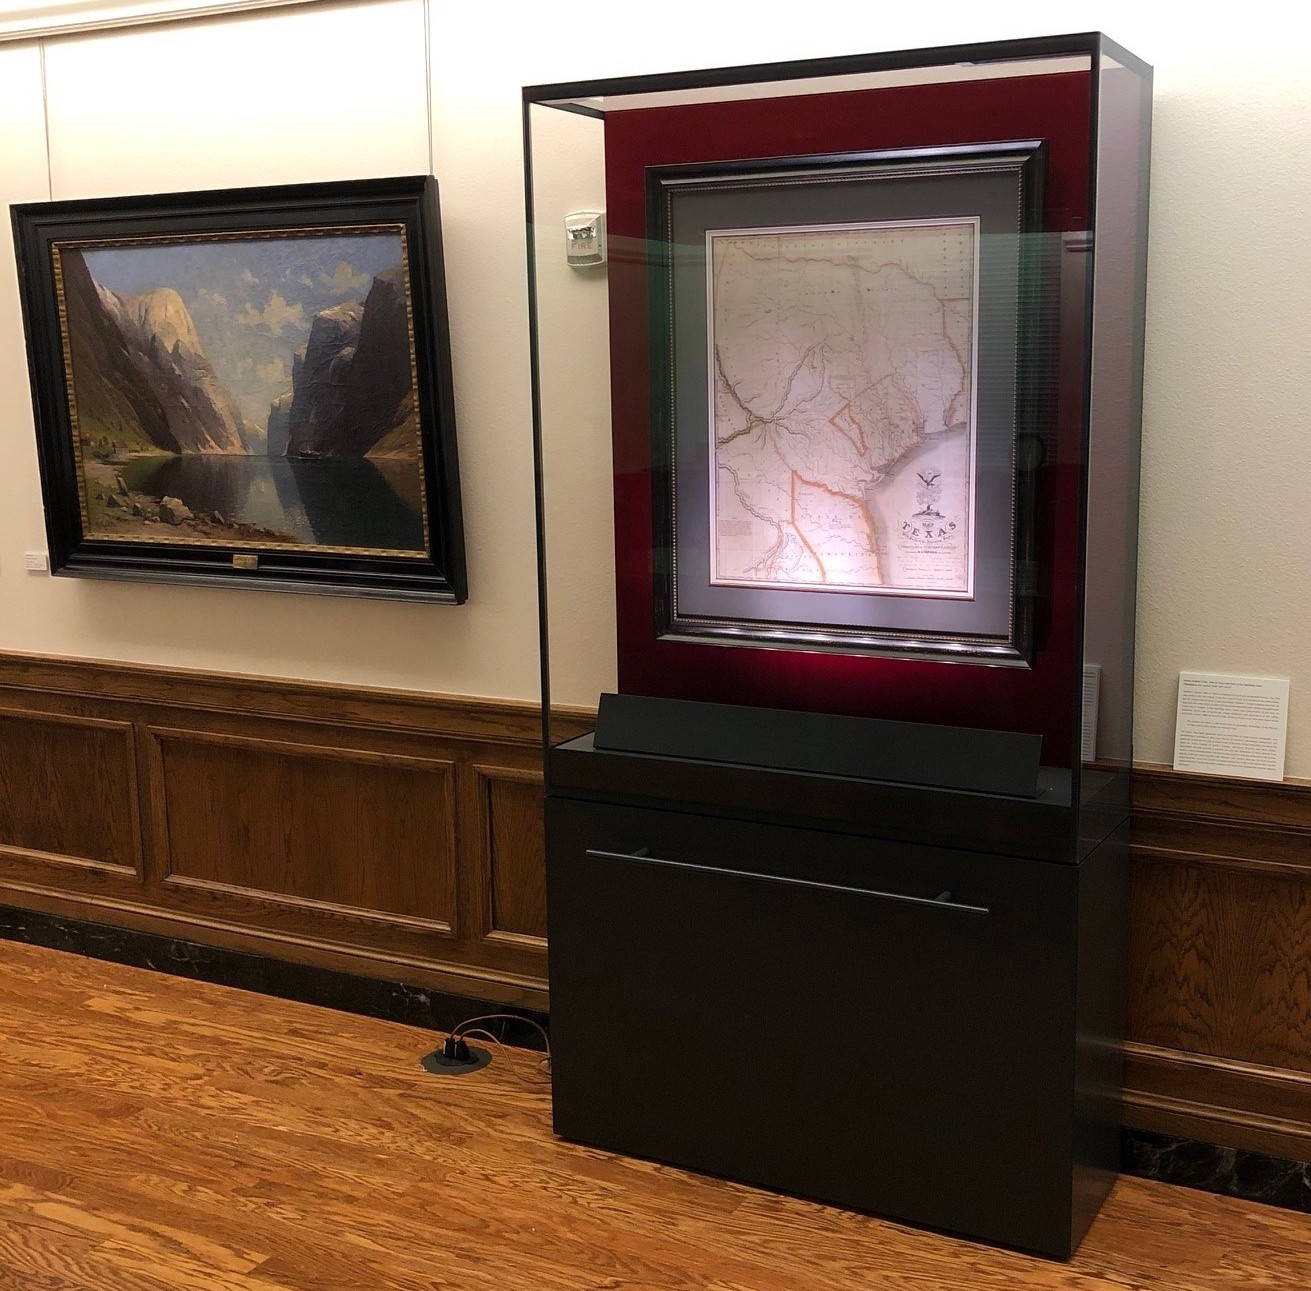 An exhibition case, standing against the wall and displaying the 1830 Map of Texas by Stephen F. Austin. A painting, showing mountains and a lake, hangs on the wall, next to the case.